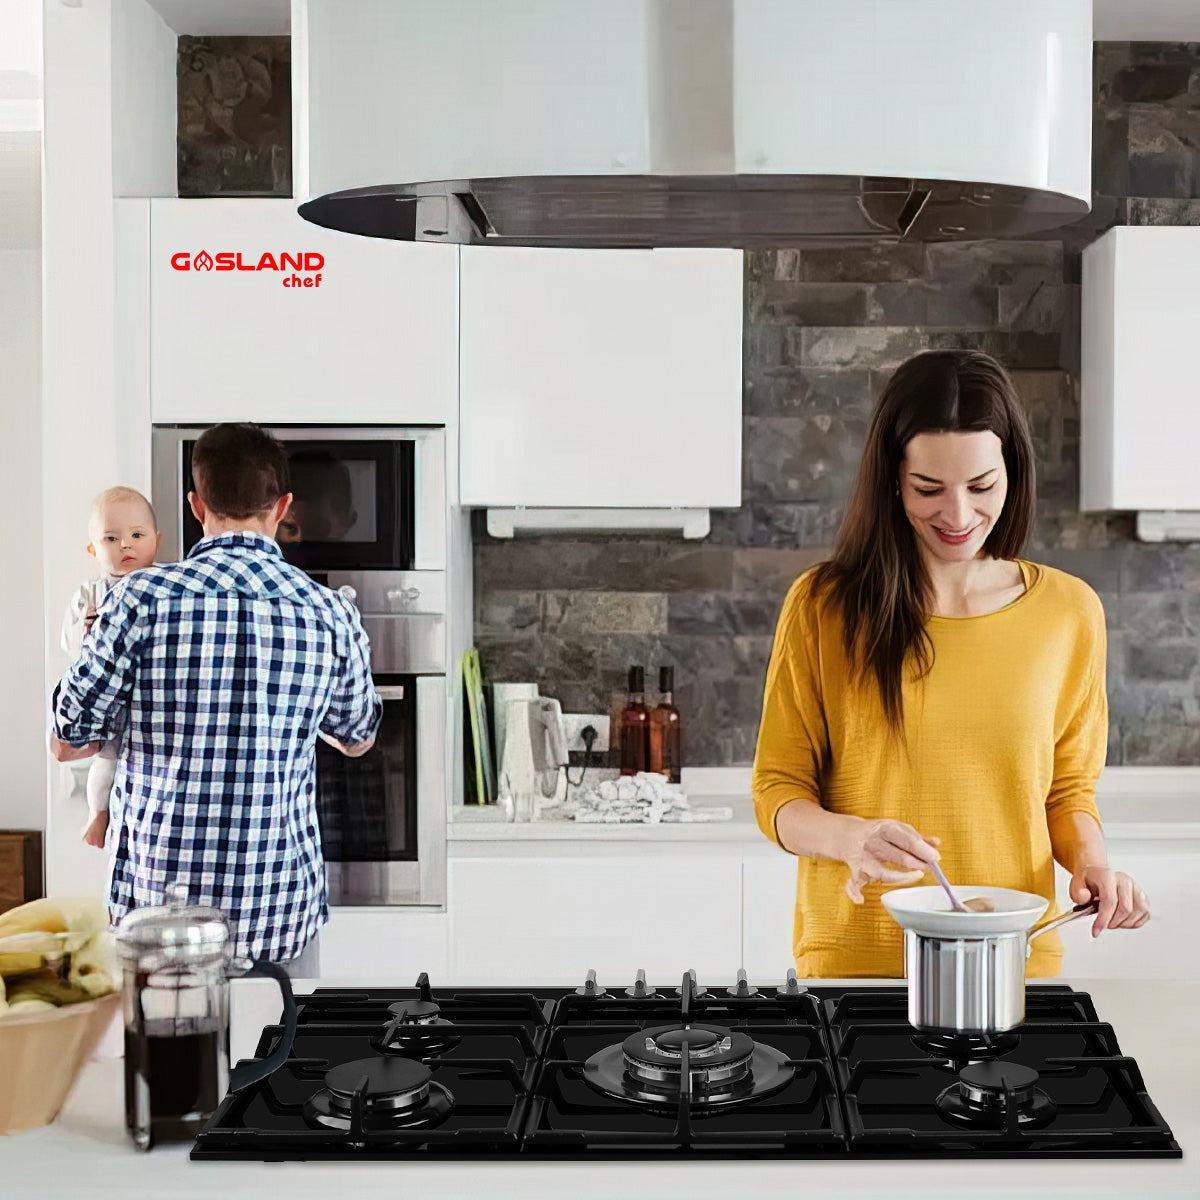 Kitchen & Outdoors Appliance-Pros and Cons of Induction Cooktop and Gas Cooktop-GASLAND Chef